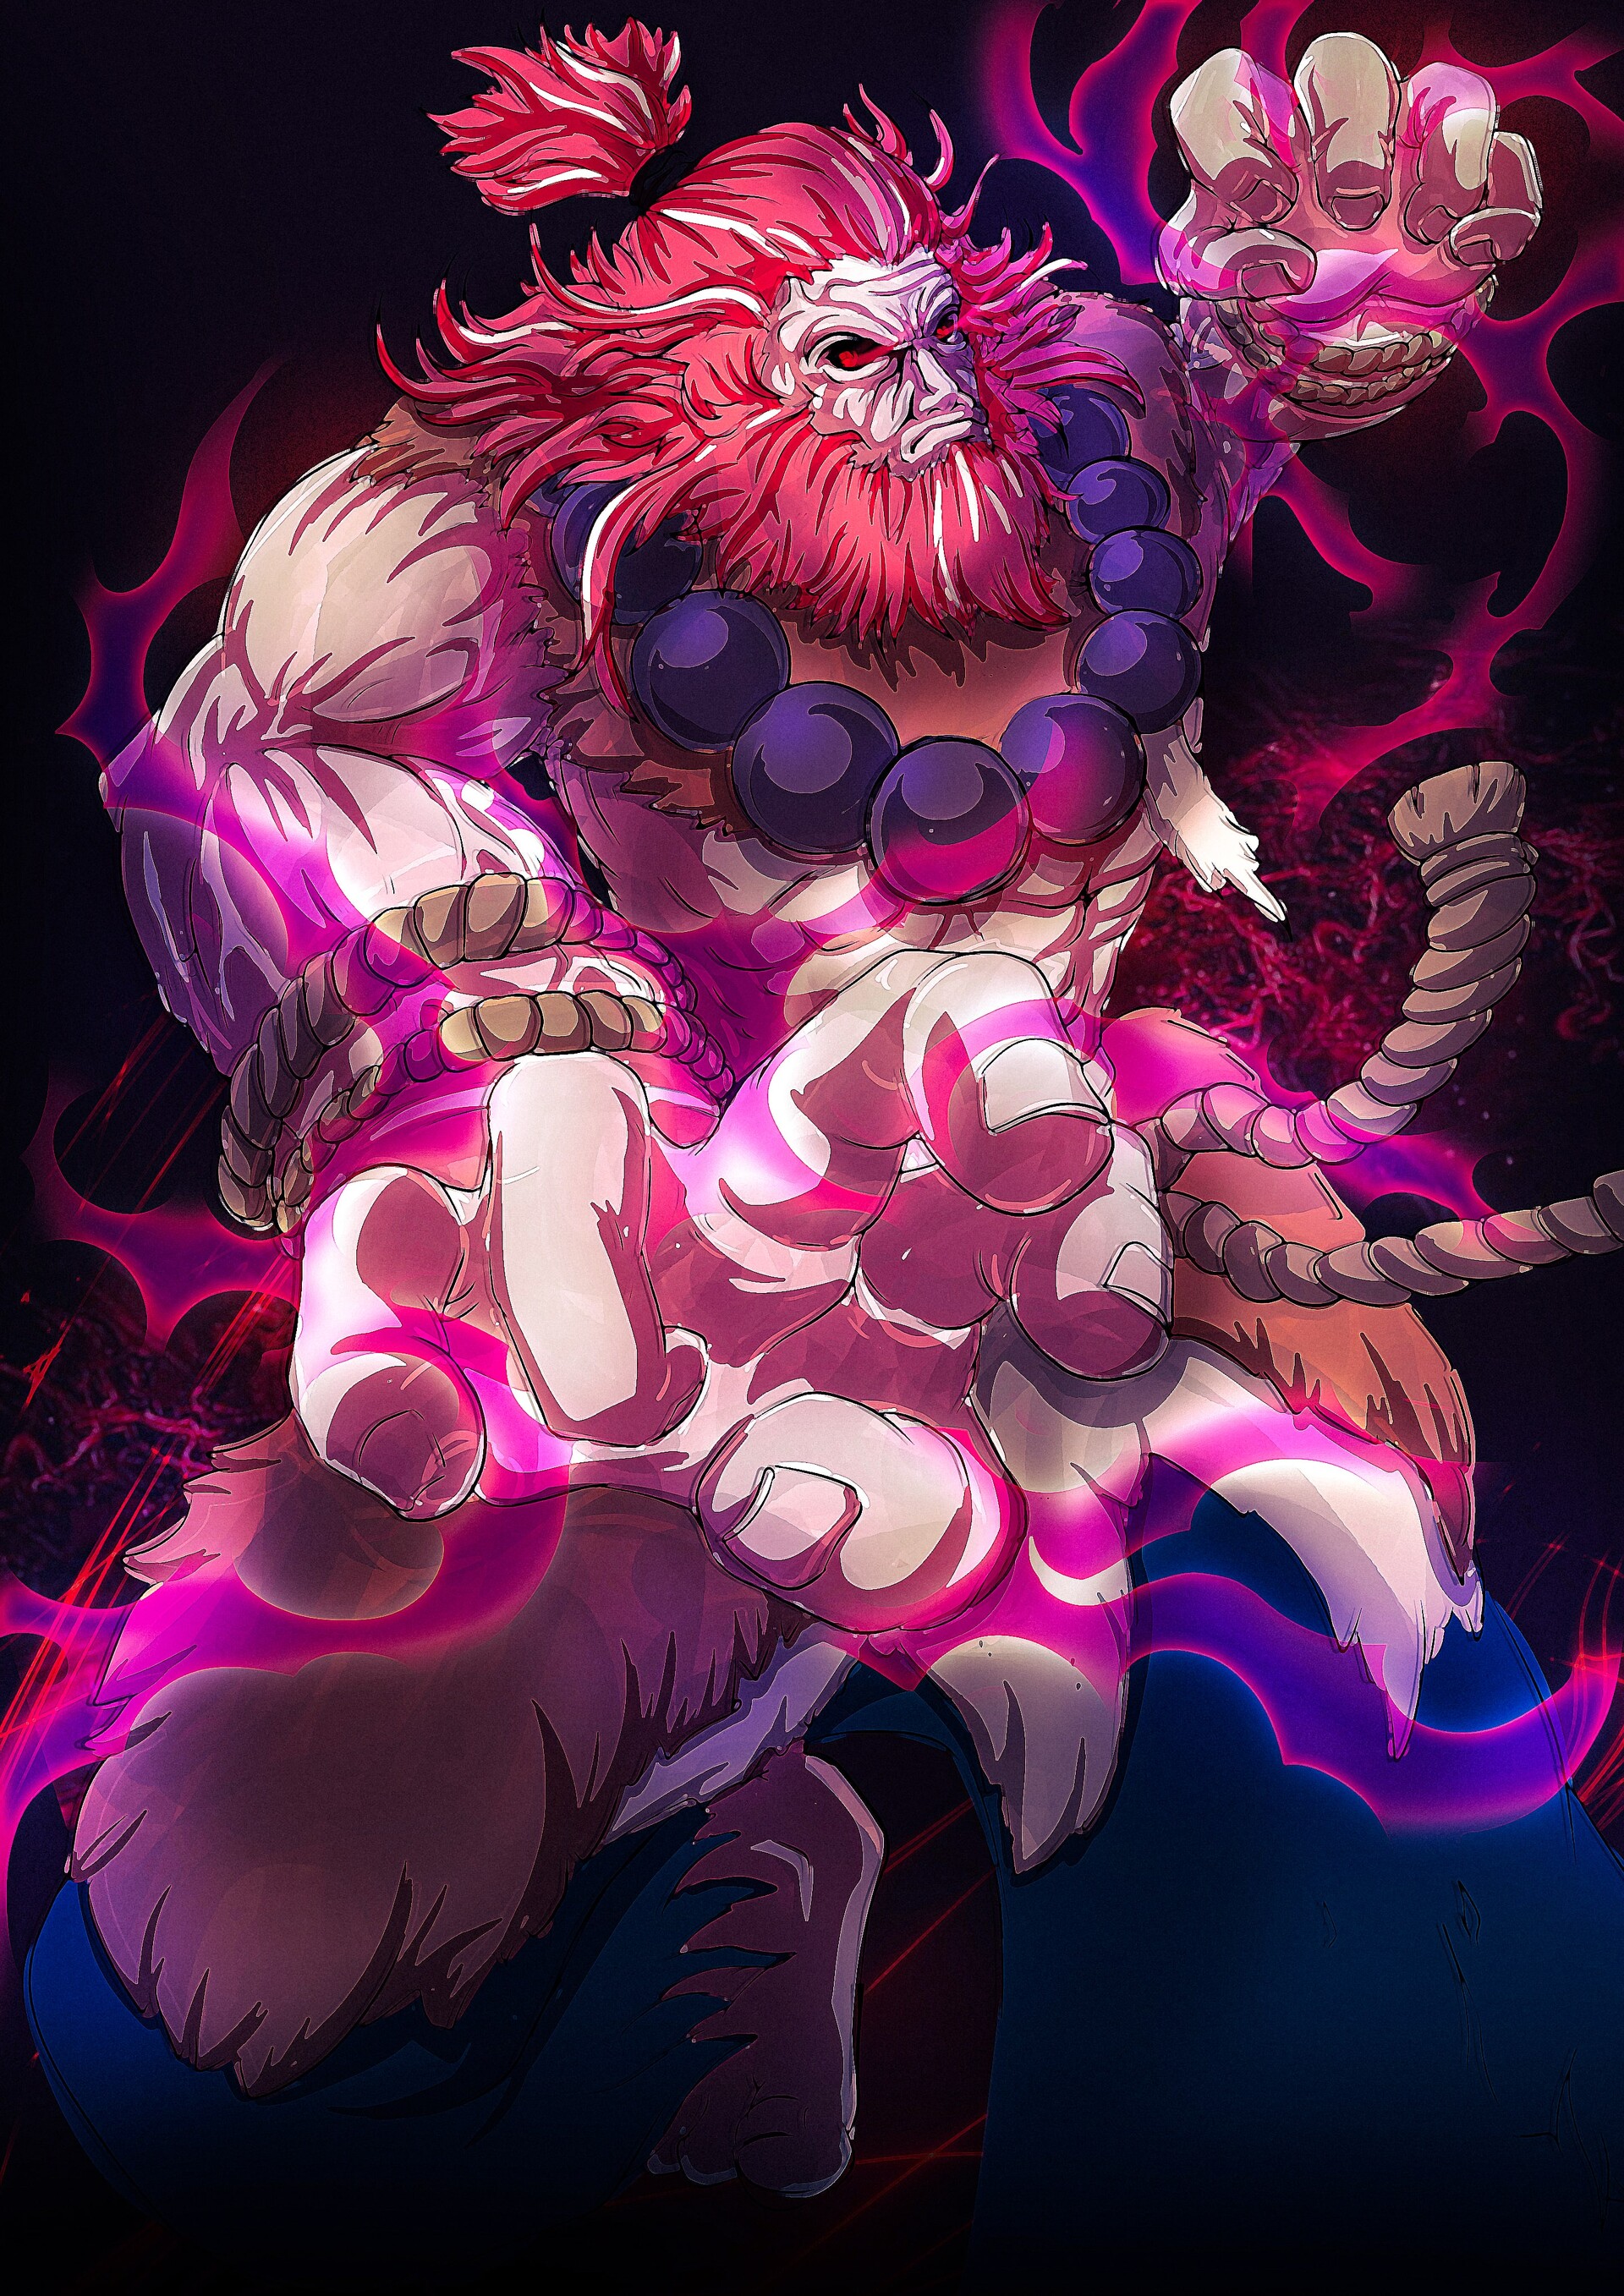 Akuma from SF6 by me : r/StreetFighter